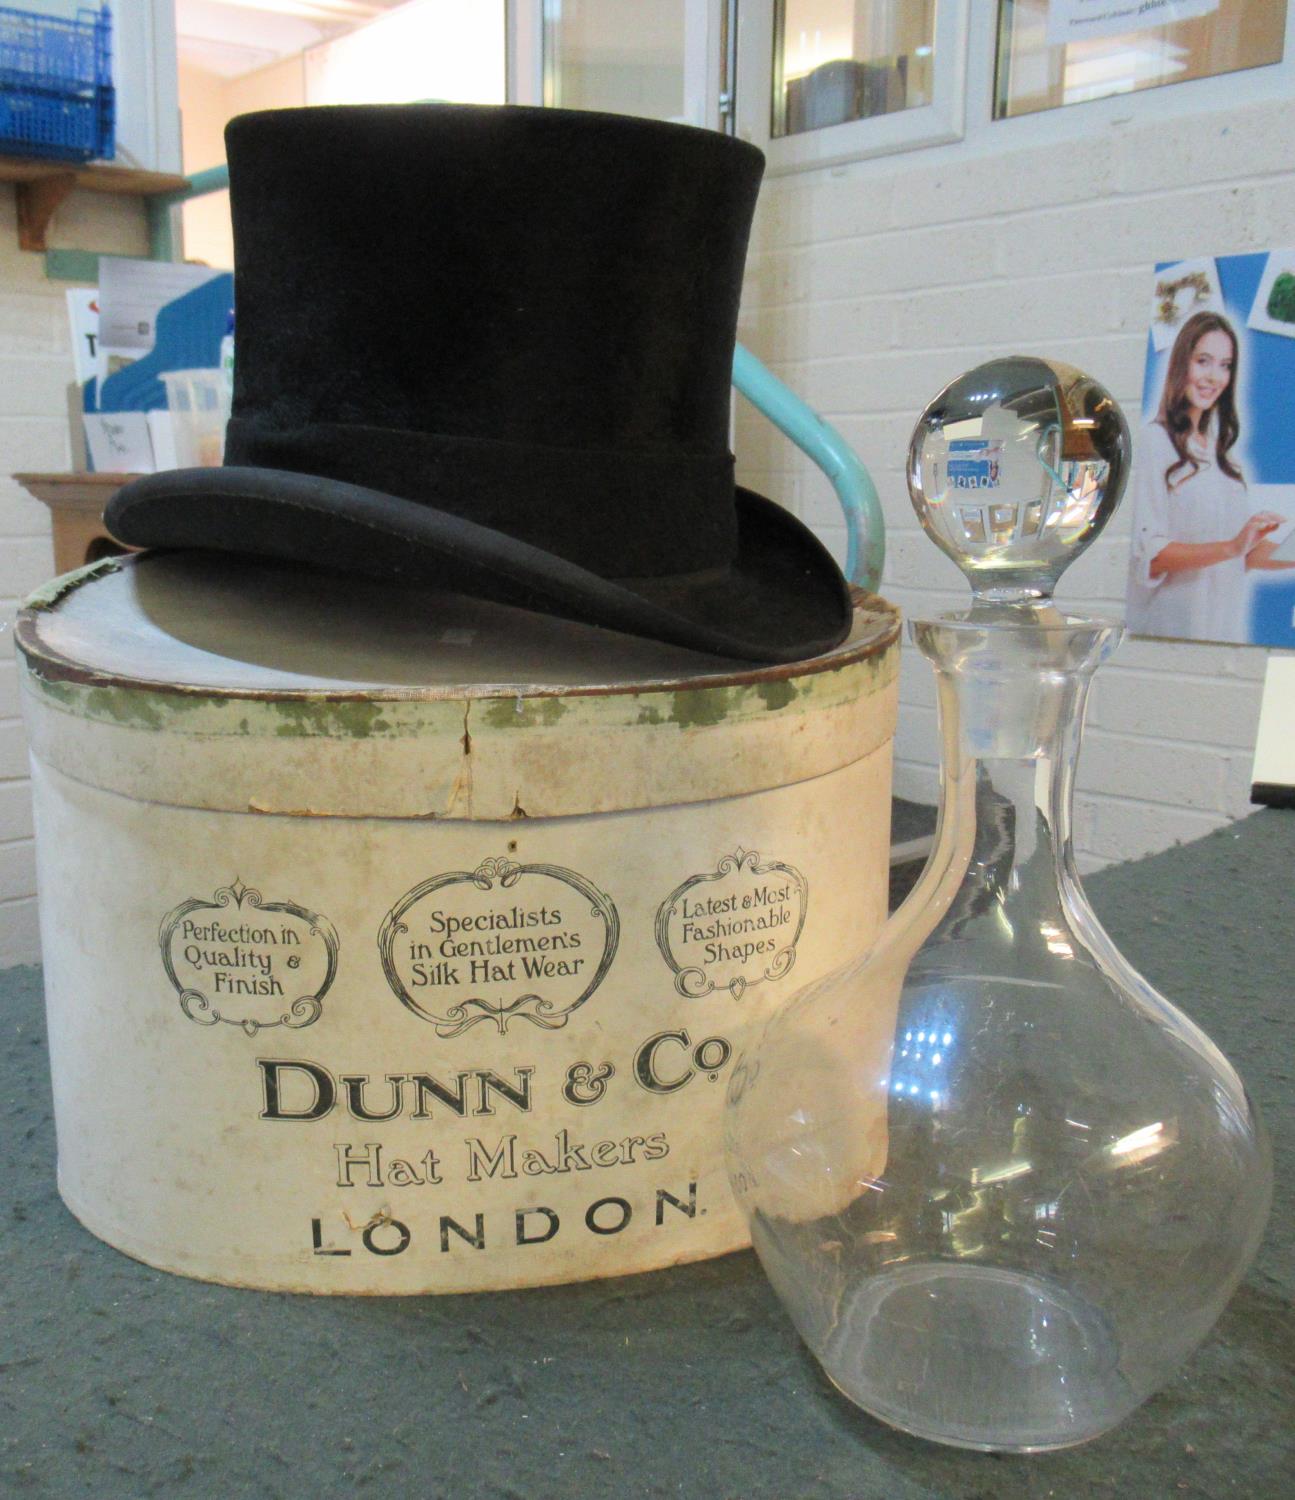 Vintage top hat in card box, marked Dunn & co. Hat Makers, London